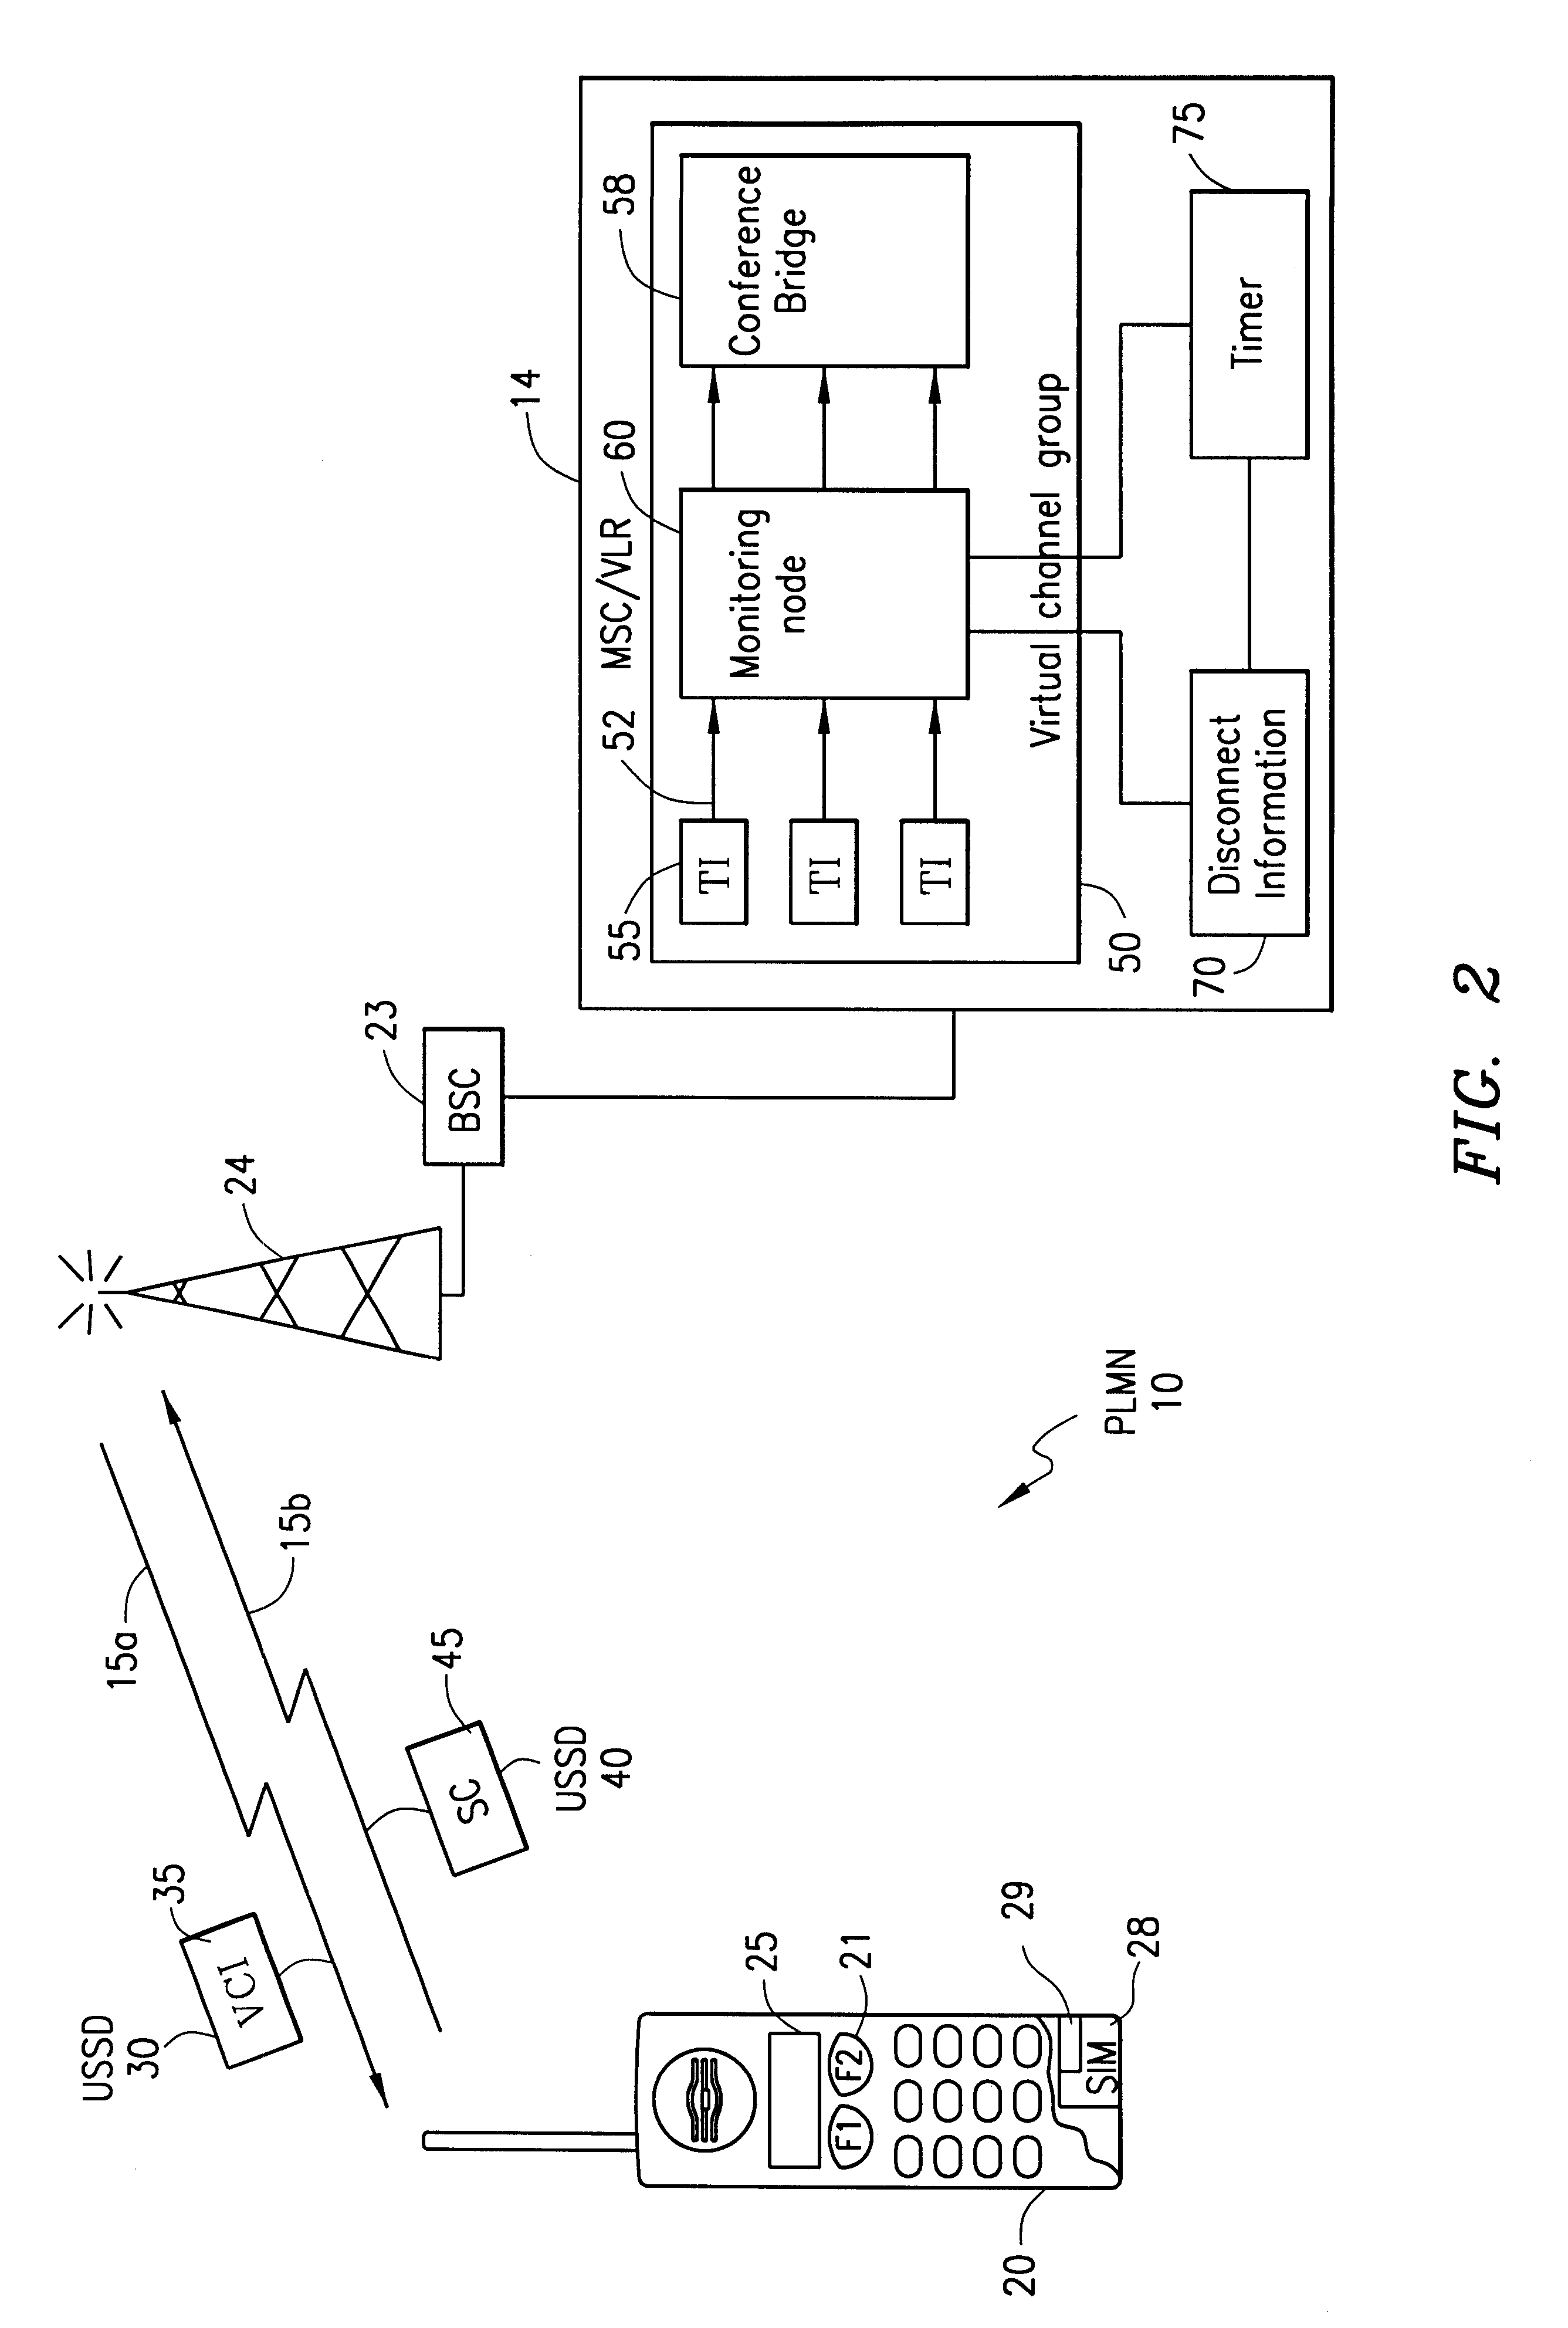 System and method for virtual citizen's band radio in a cellular network